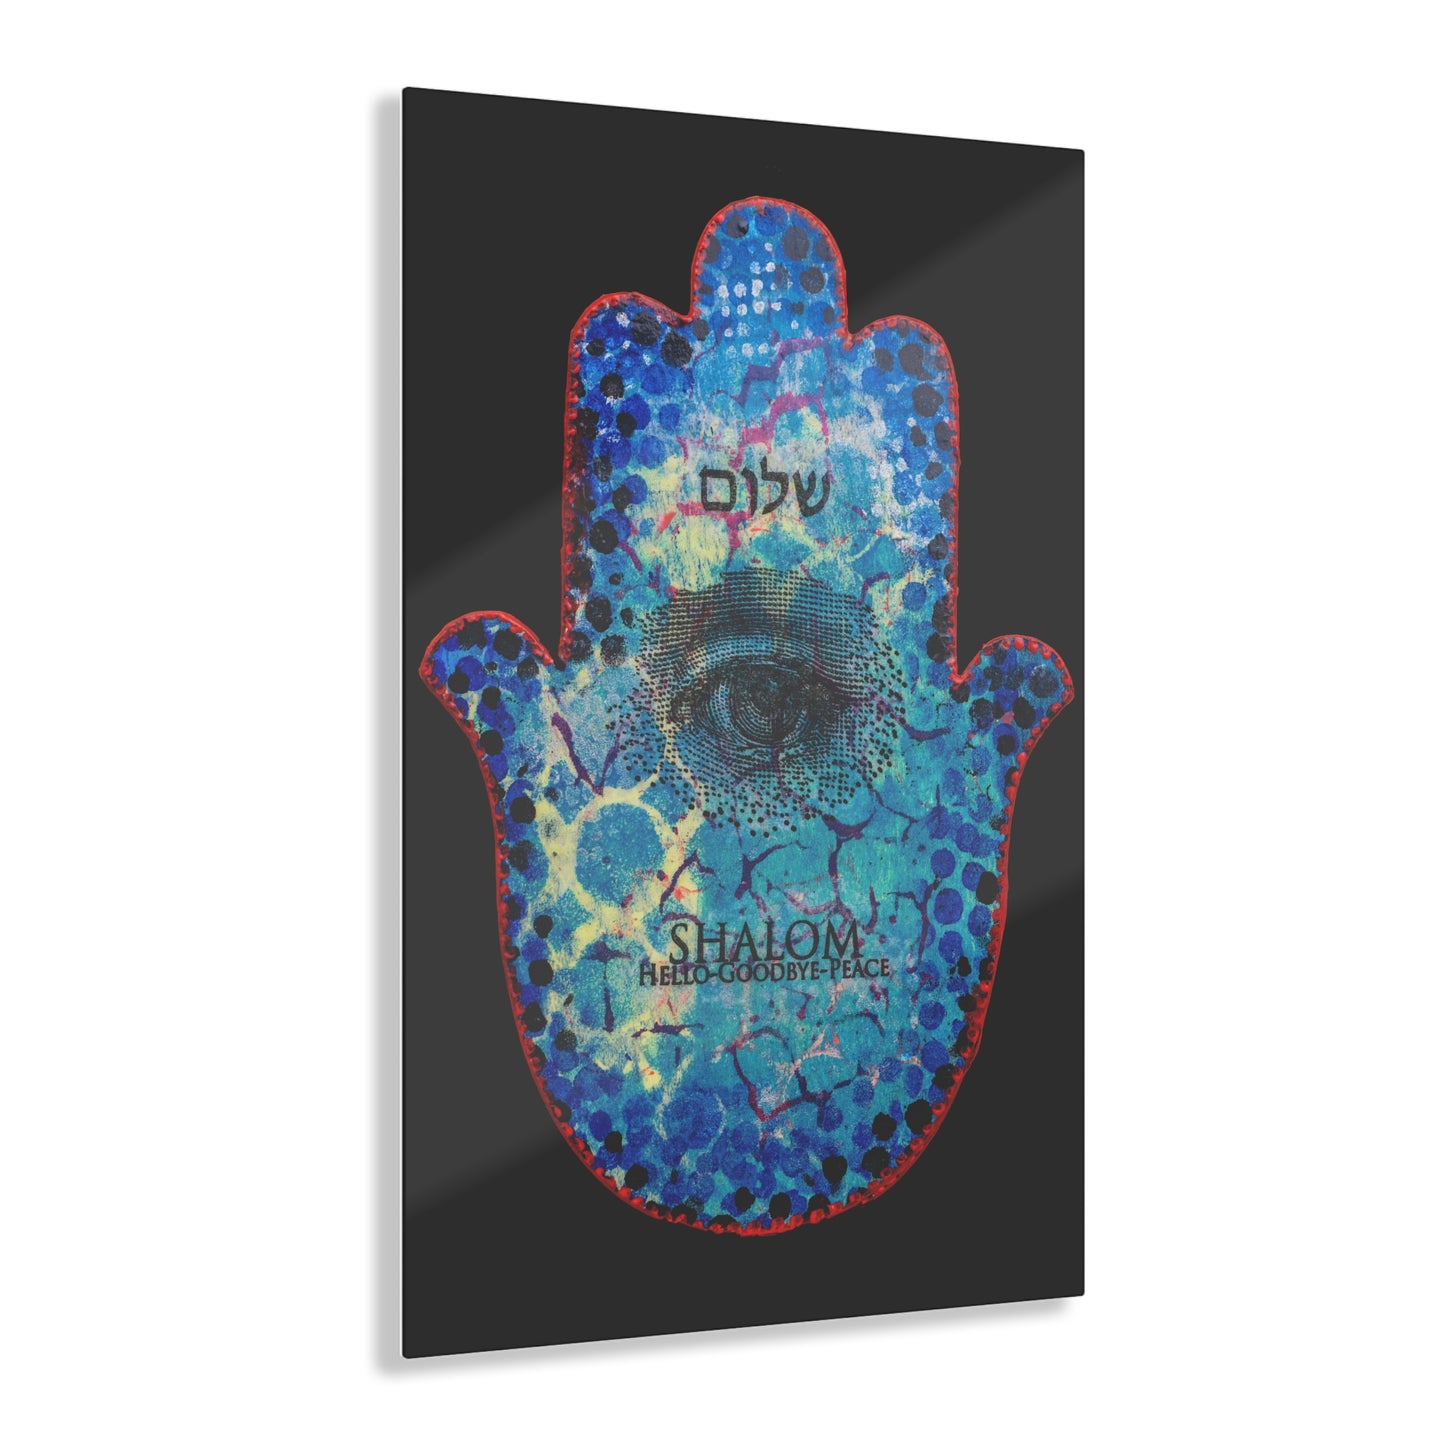 "Hamsa in Blues" by Esther Cohen Glossy Acrylic Print